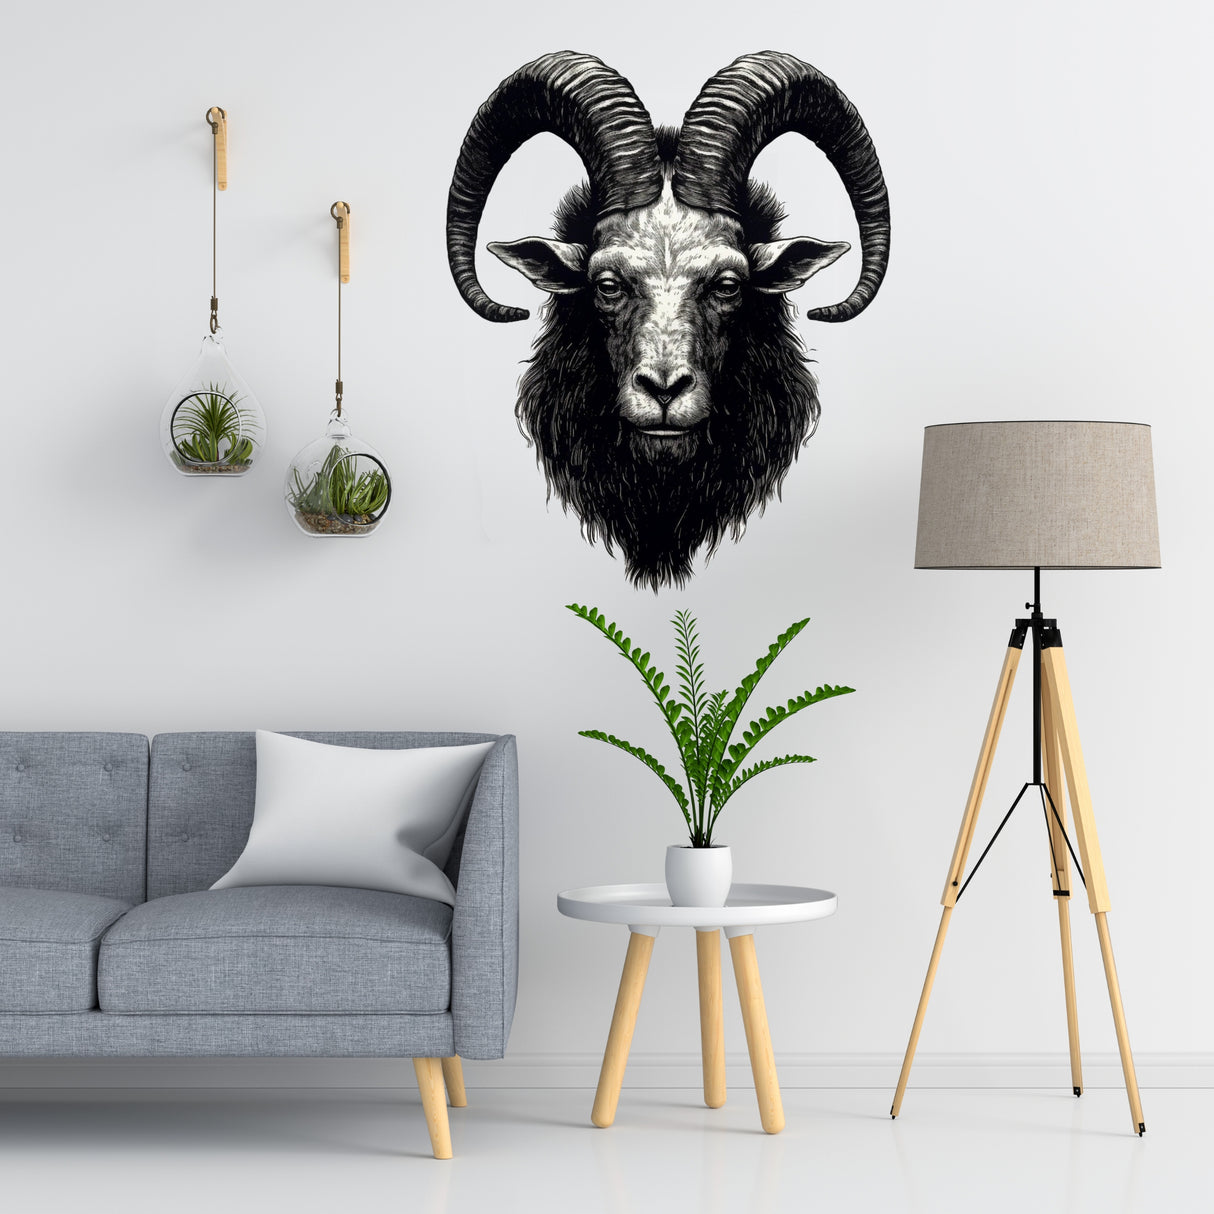 Realistic Surreal Ram Head Wall Decal - Detailed Ink Illustration Art Sticker